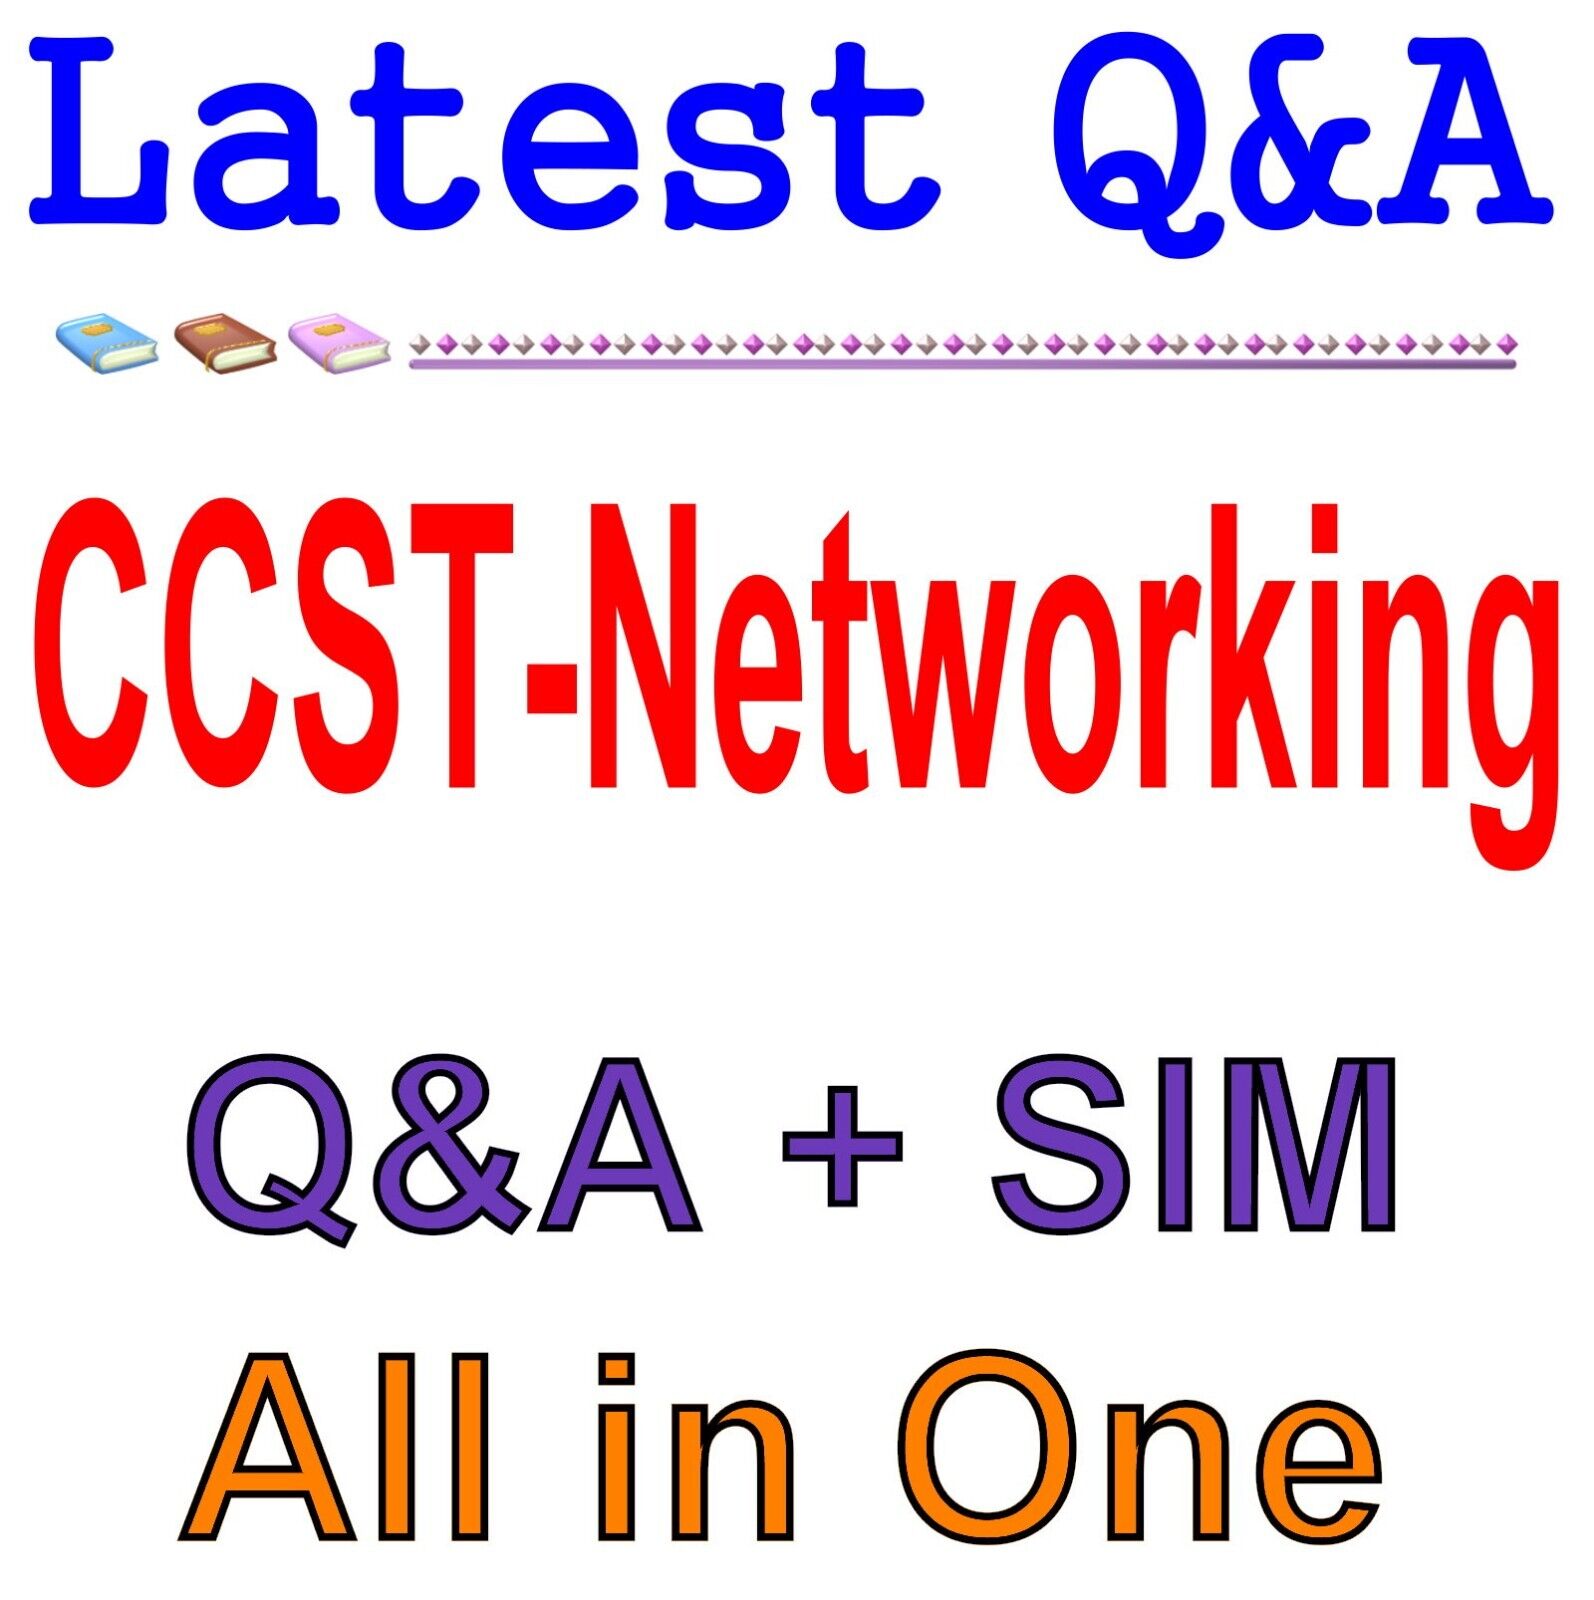 Cisco Certified Support Technician (CCST) Networking CCST-Networking Exam Q&A